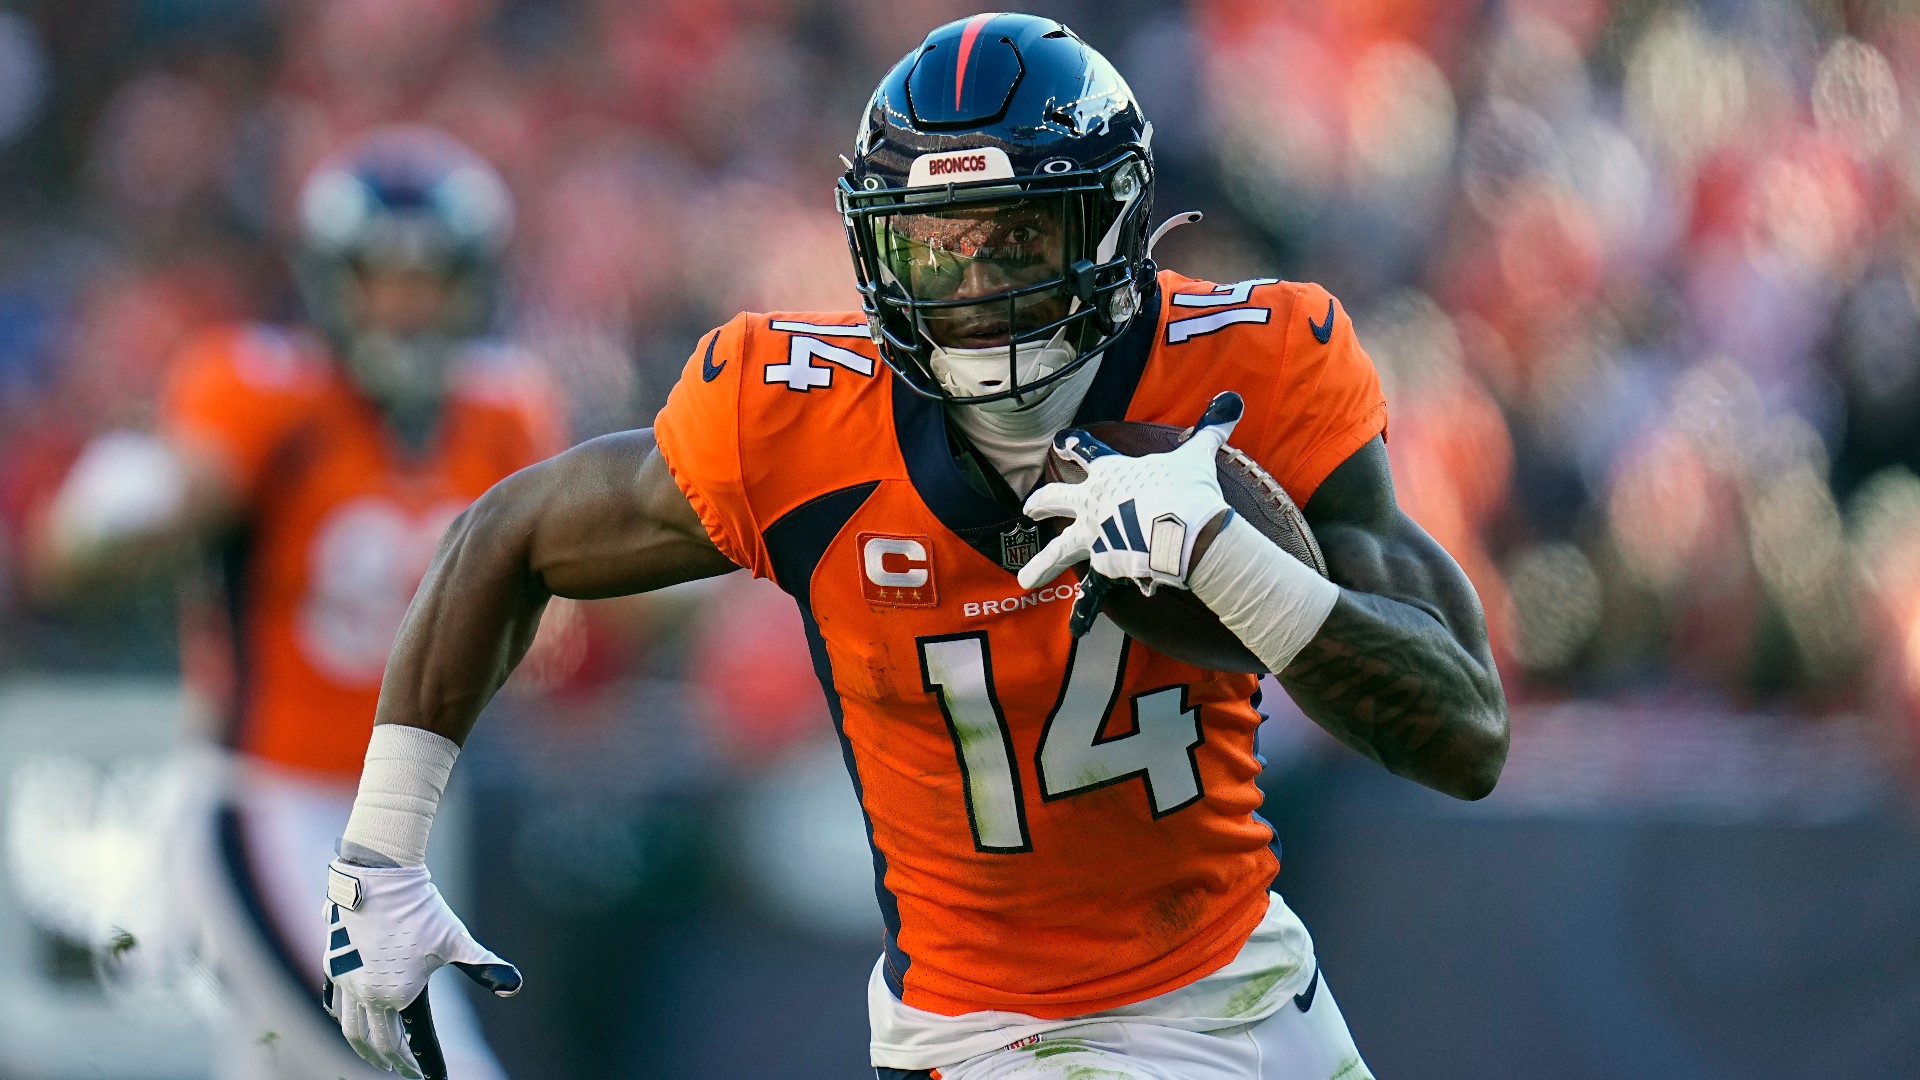 Denver's top receiver is one healthy player who hasn’t shown up for the Broncos’ offseason program.